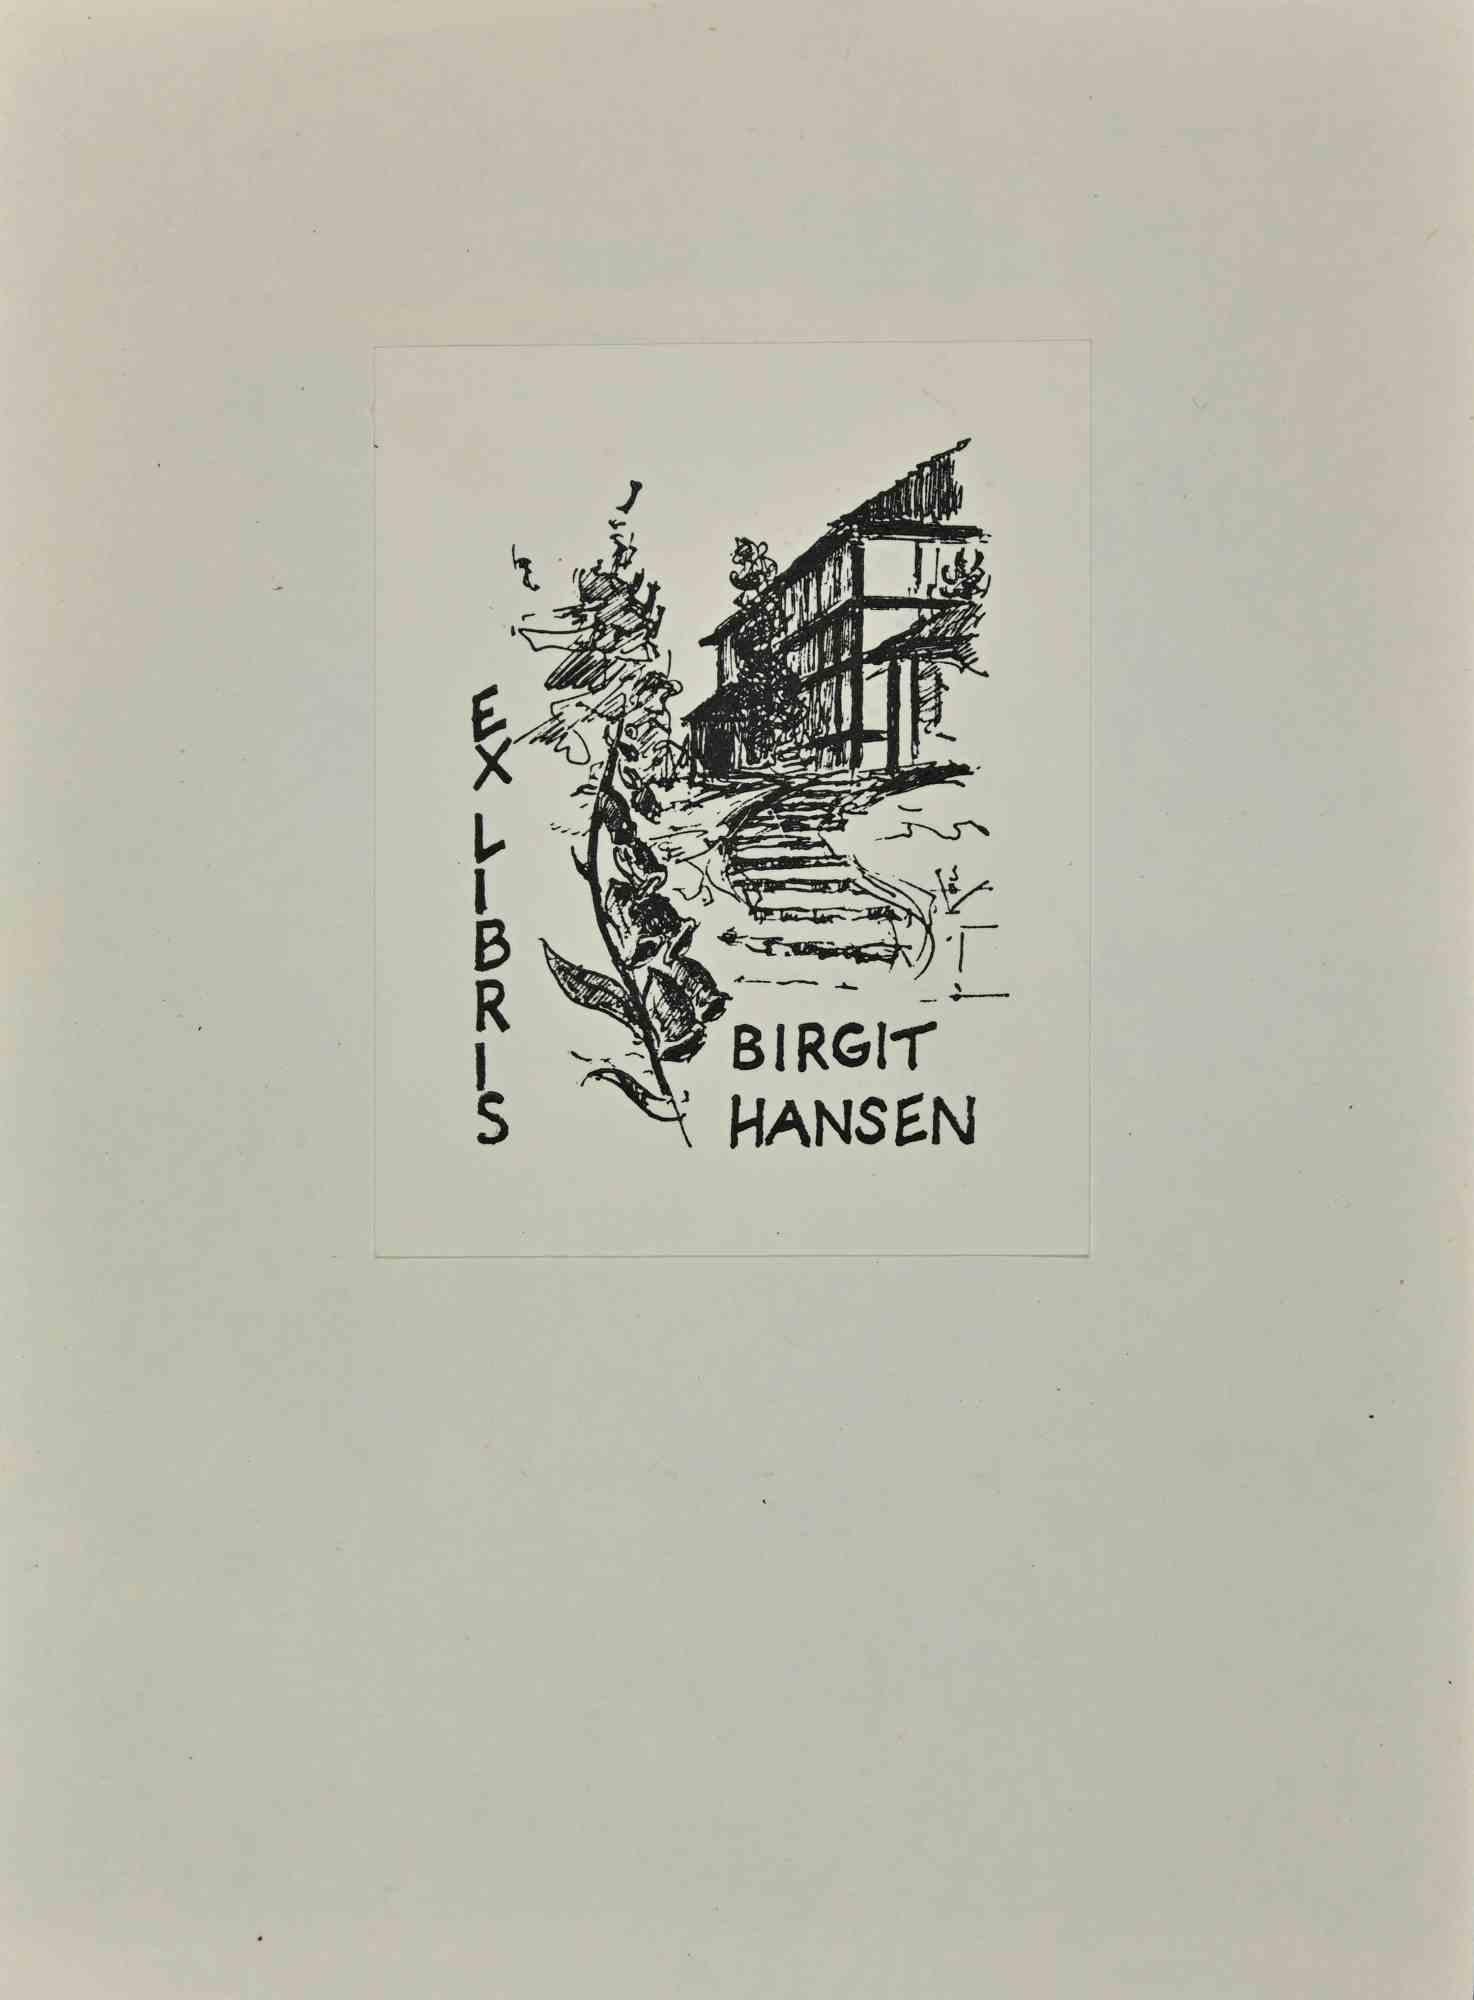  Ex Libris  - Birgit Hansen is a Modern Artwork realized in Mid 20th Century, by Mirjam Karila.

Ex Libris. B/W woodcut on paper.  Hand Signed on the back.

The work is glued on cardboard.

Total dimensions: 20x 15 cm.

Good conditions.

The artist